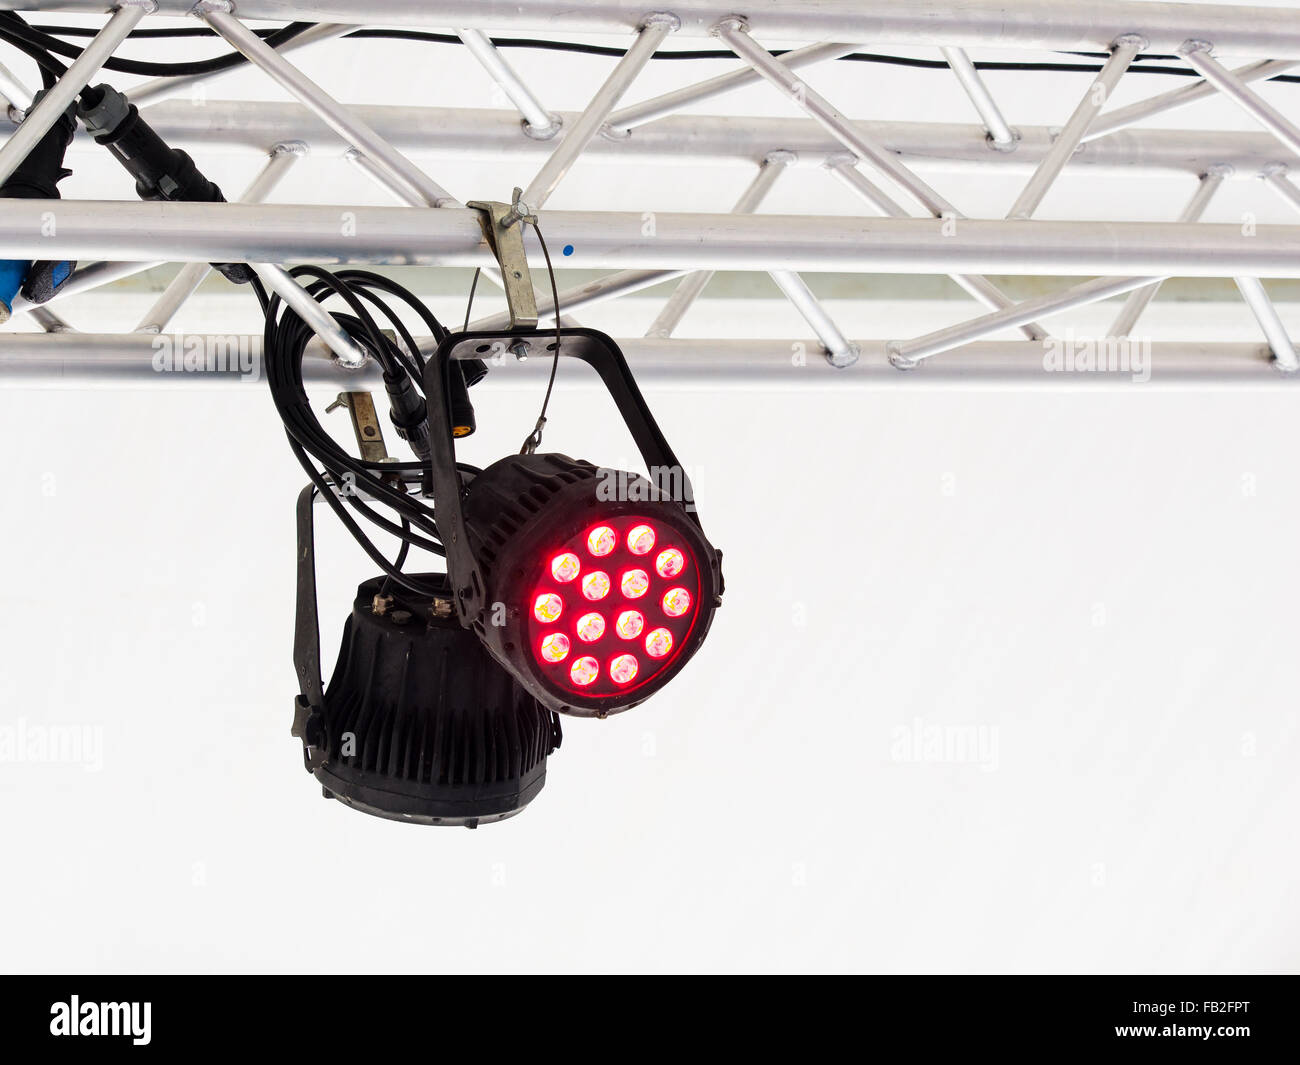 Professional Lighting Equipment Led Projector Suspended On An Aluminum Truss White Background Stock Photo Alamy